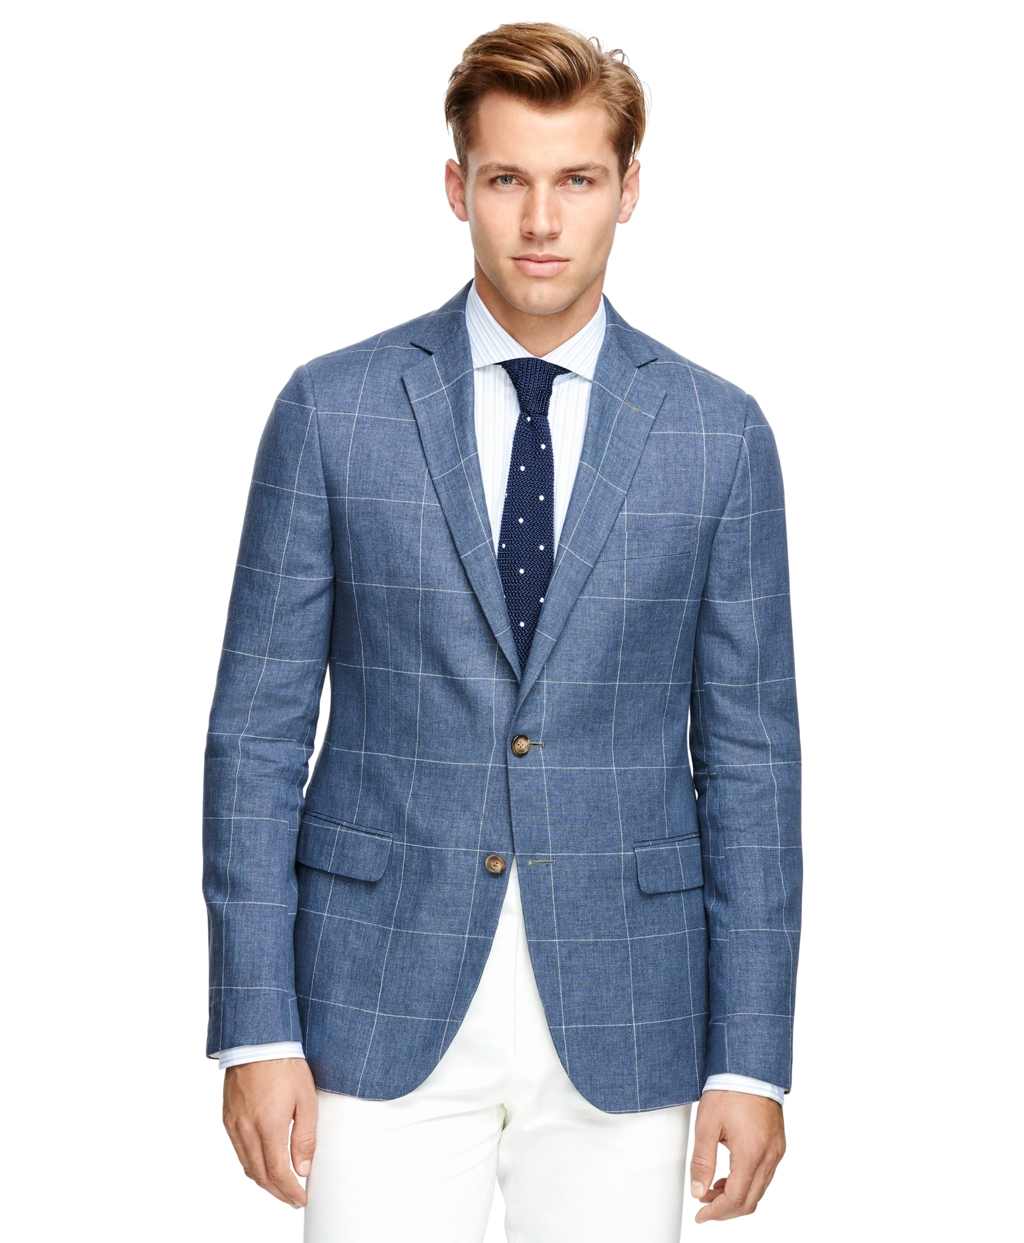 Lyst - Brooks Brothers Fitzgerald Fit Windowpane Sport Coat in Blue for Men